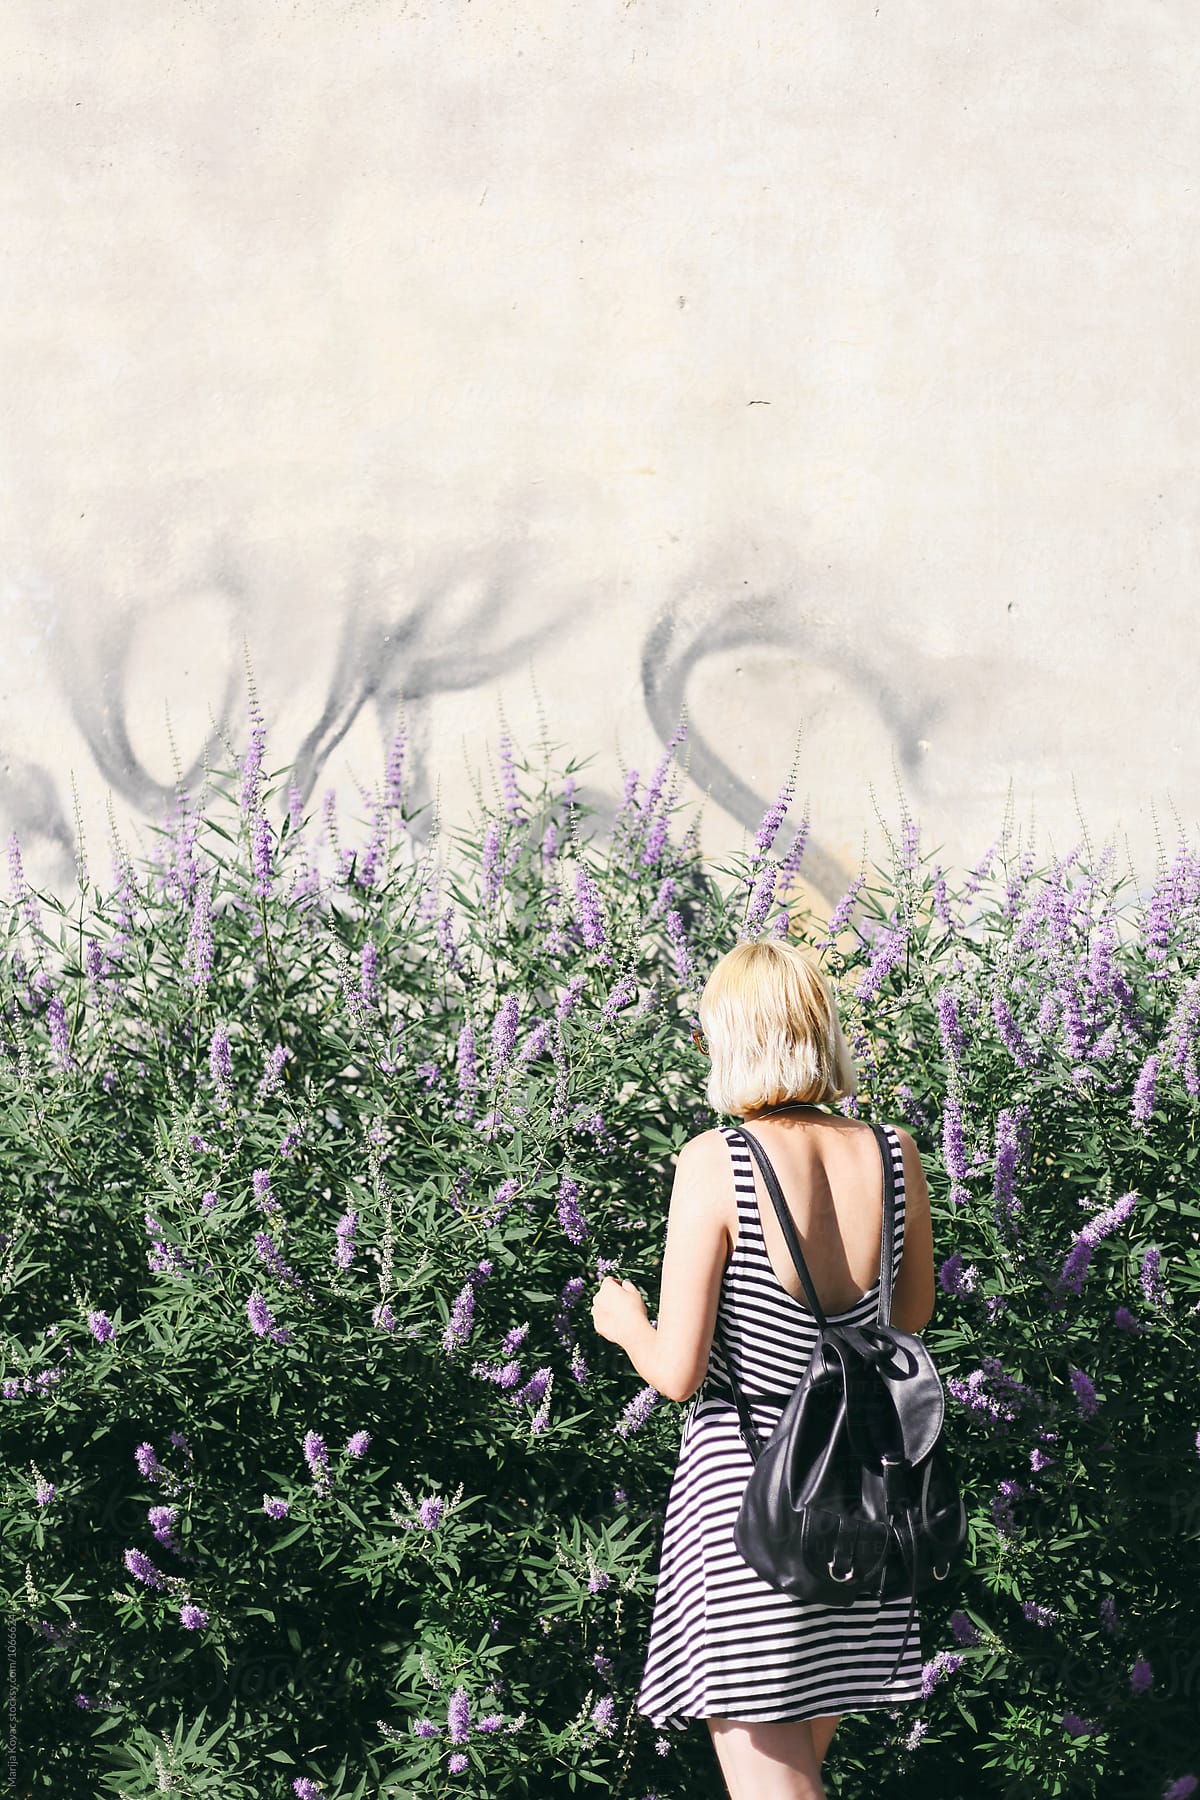 Blonde woman from behind, next to the purple flowers